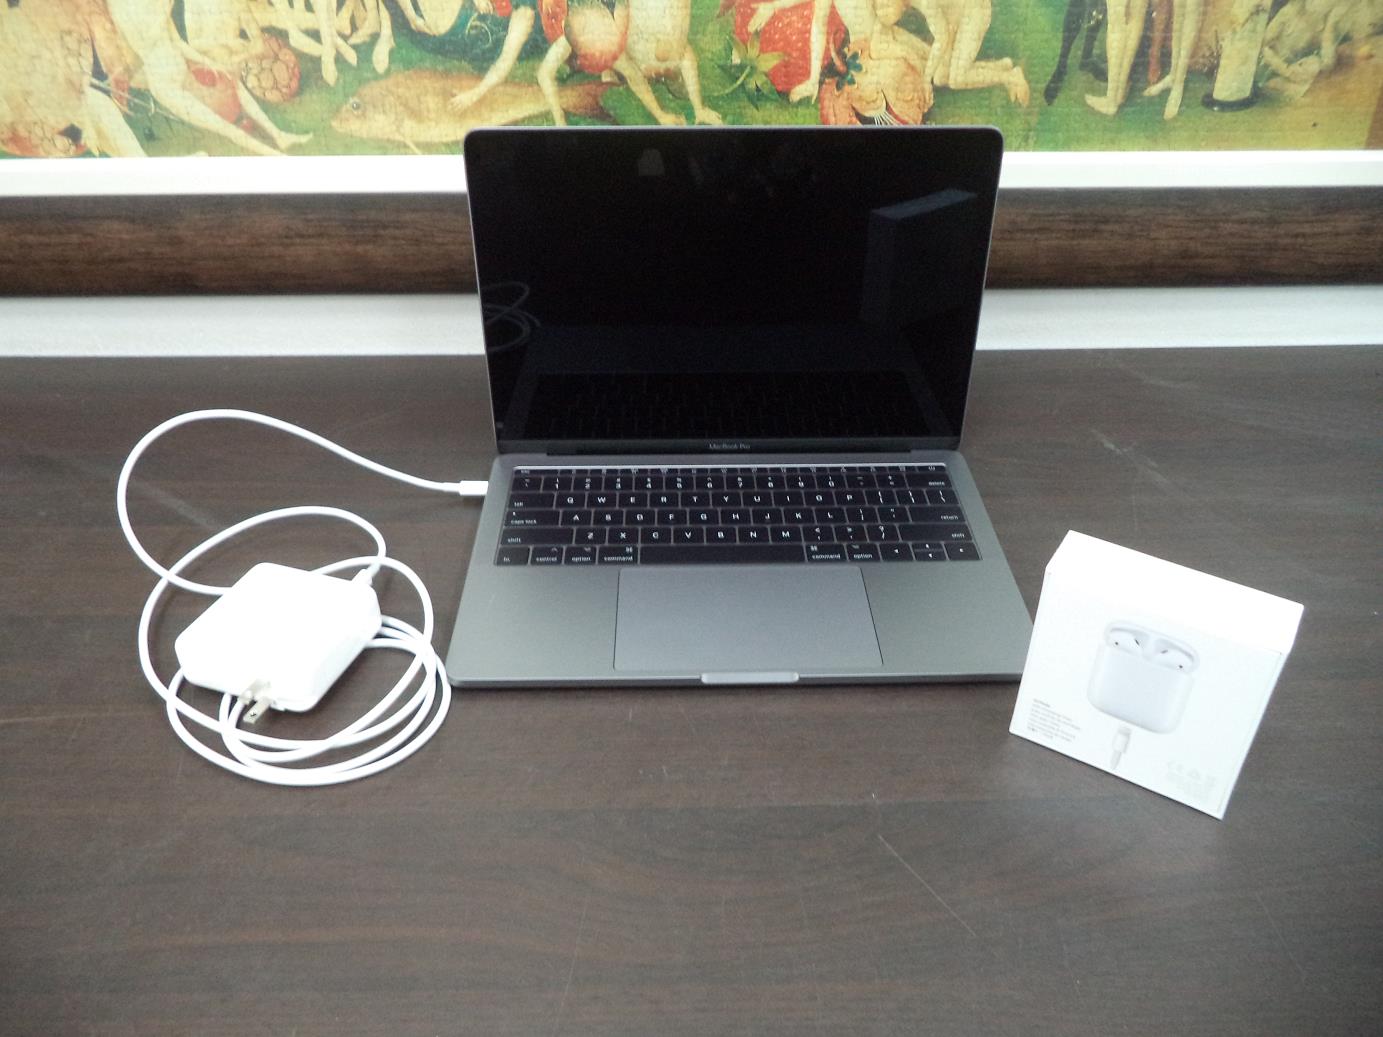 Lot # 68 from the IRS auction: AirPods and MacBook Pro